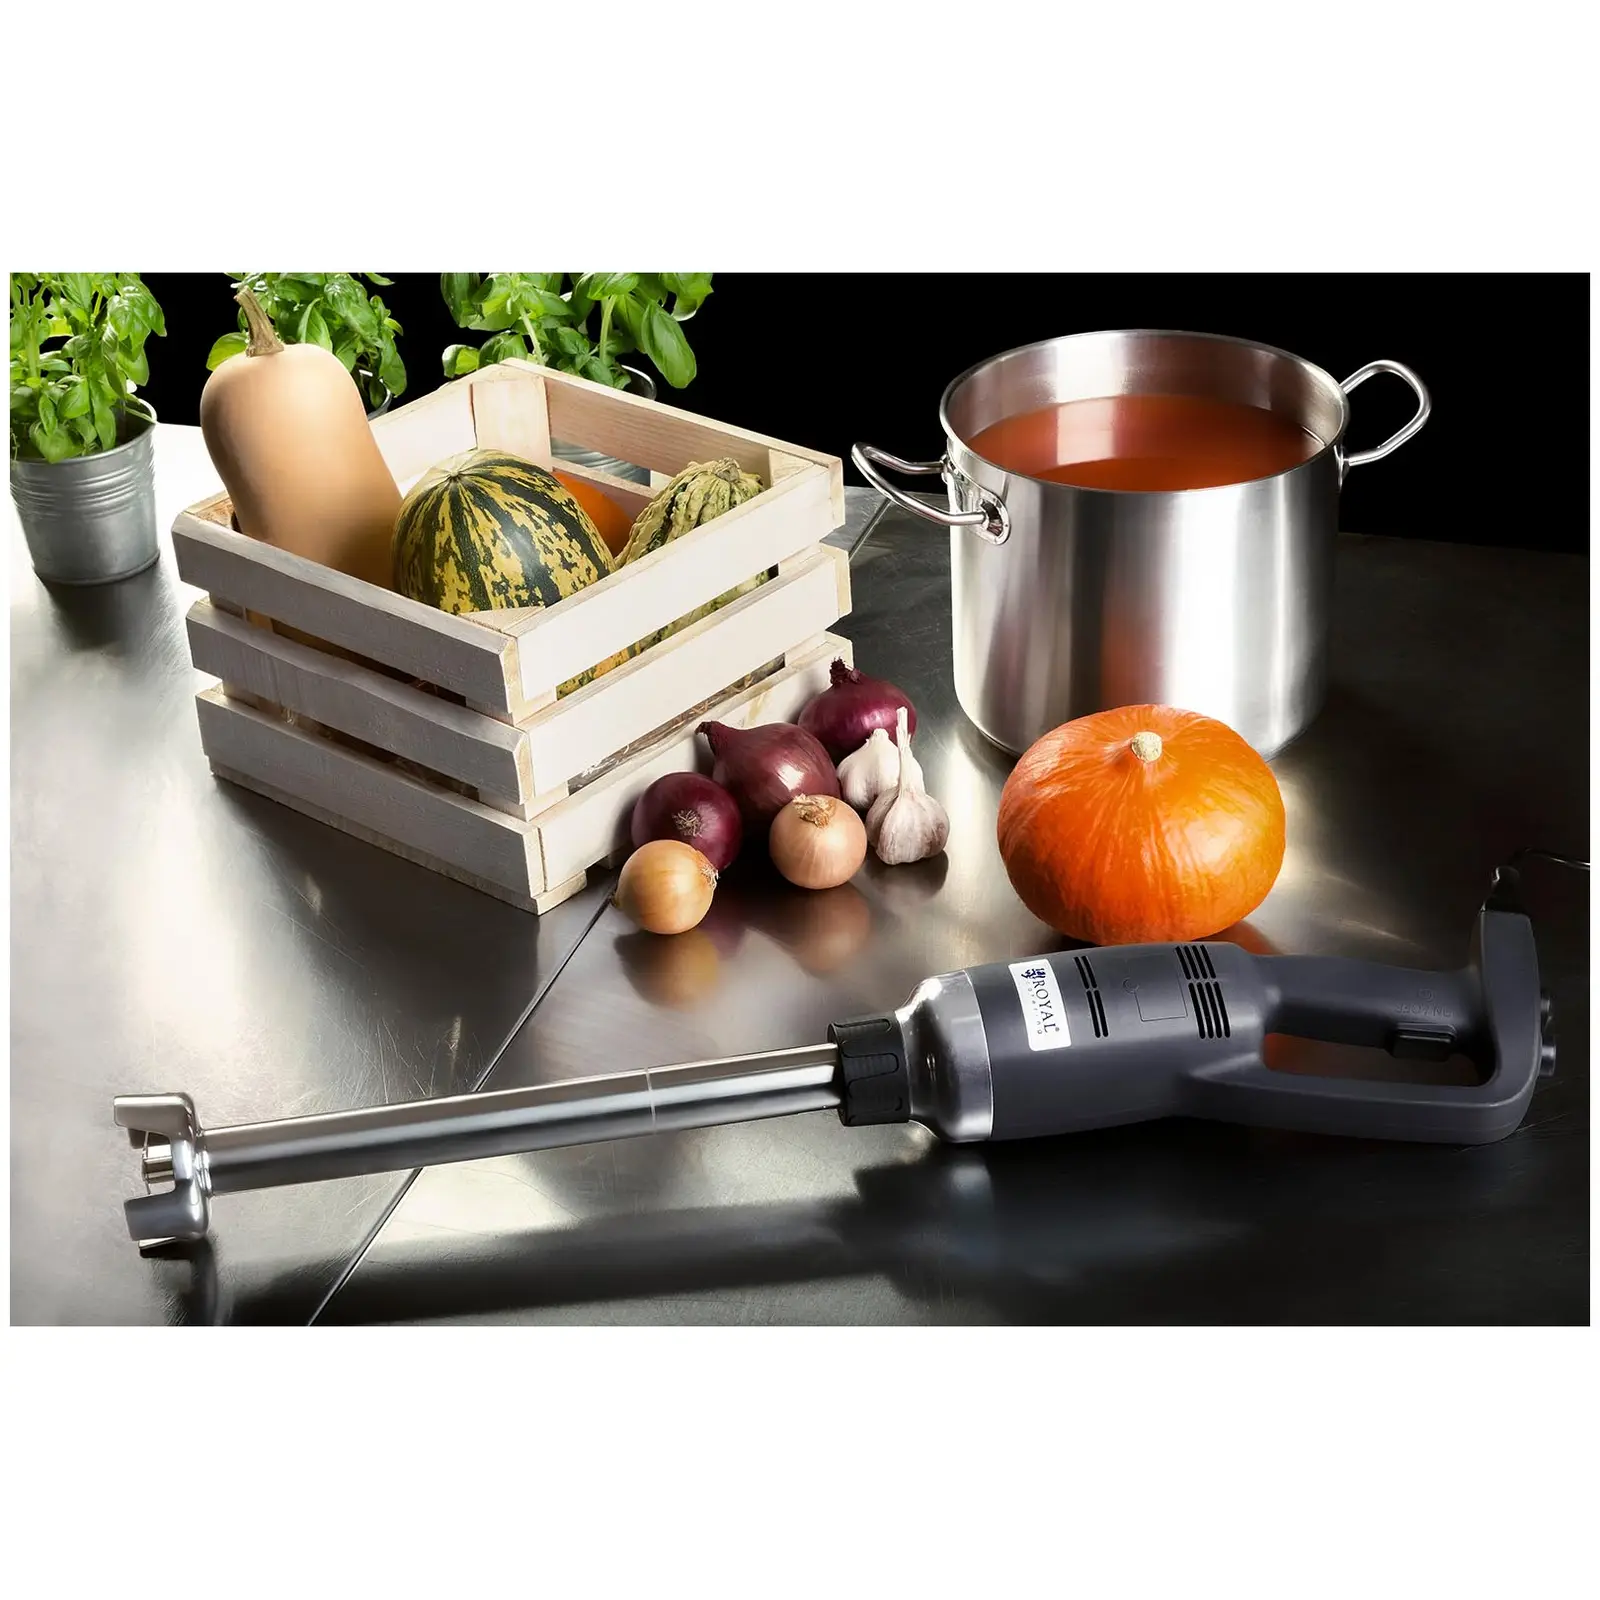 Hand blender - 350 W - 400 mm - 4,000 to 18,000 rpm